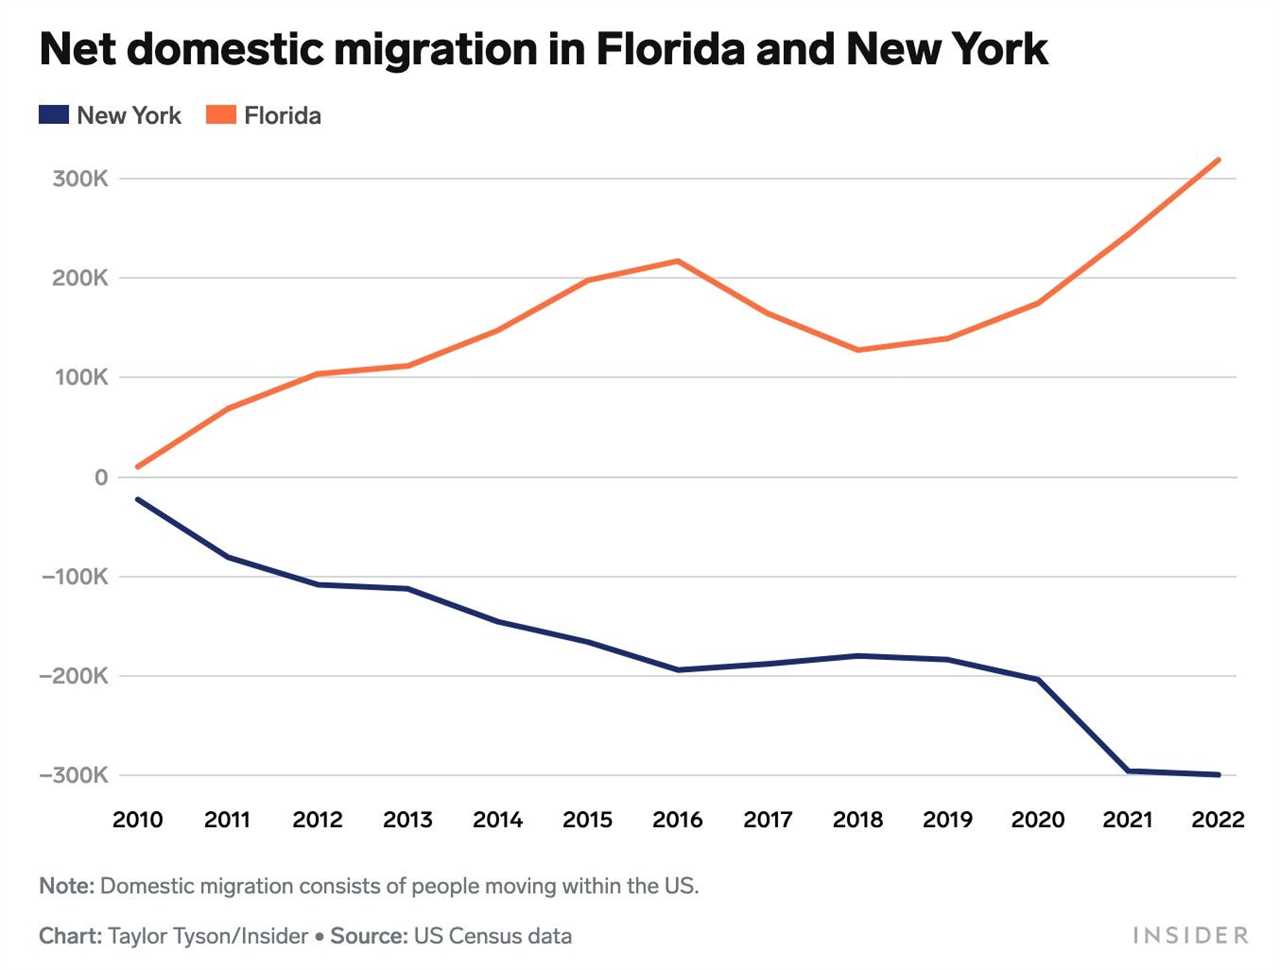 Net domestic migration in Florida and New York.